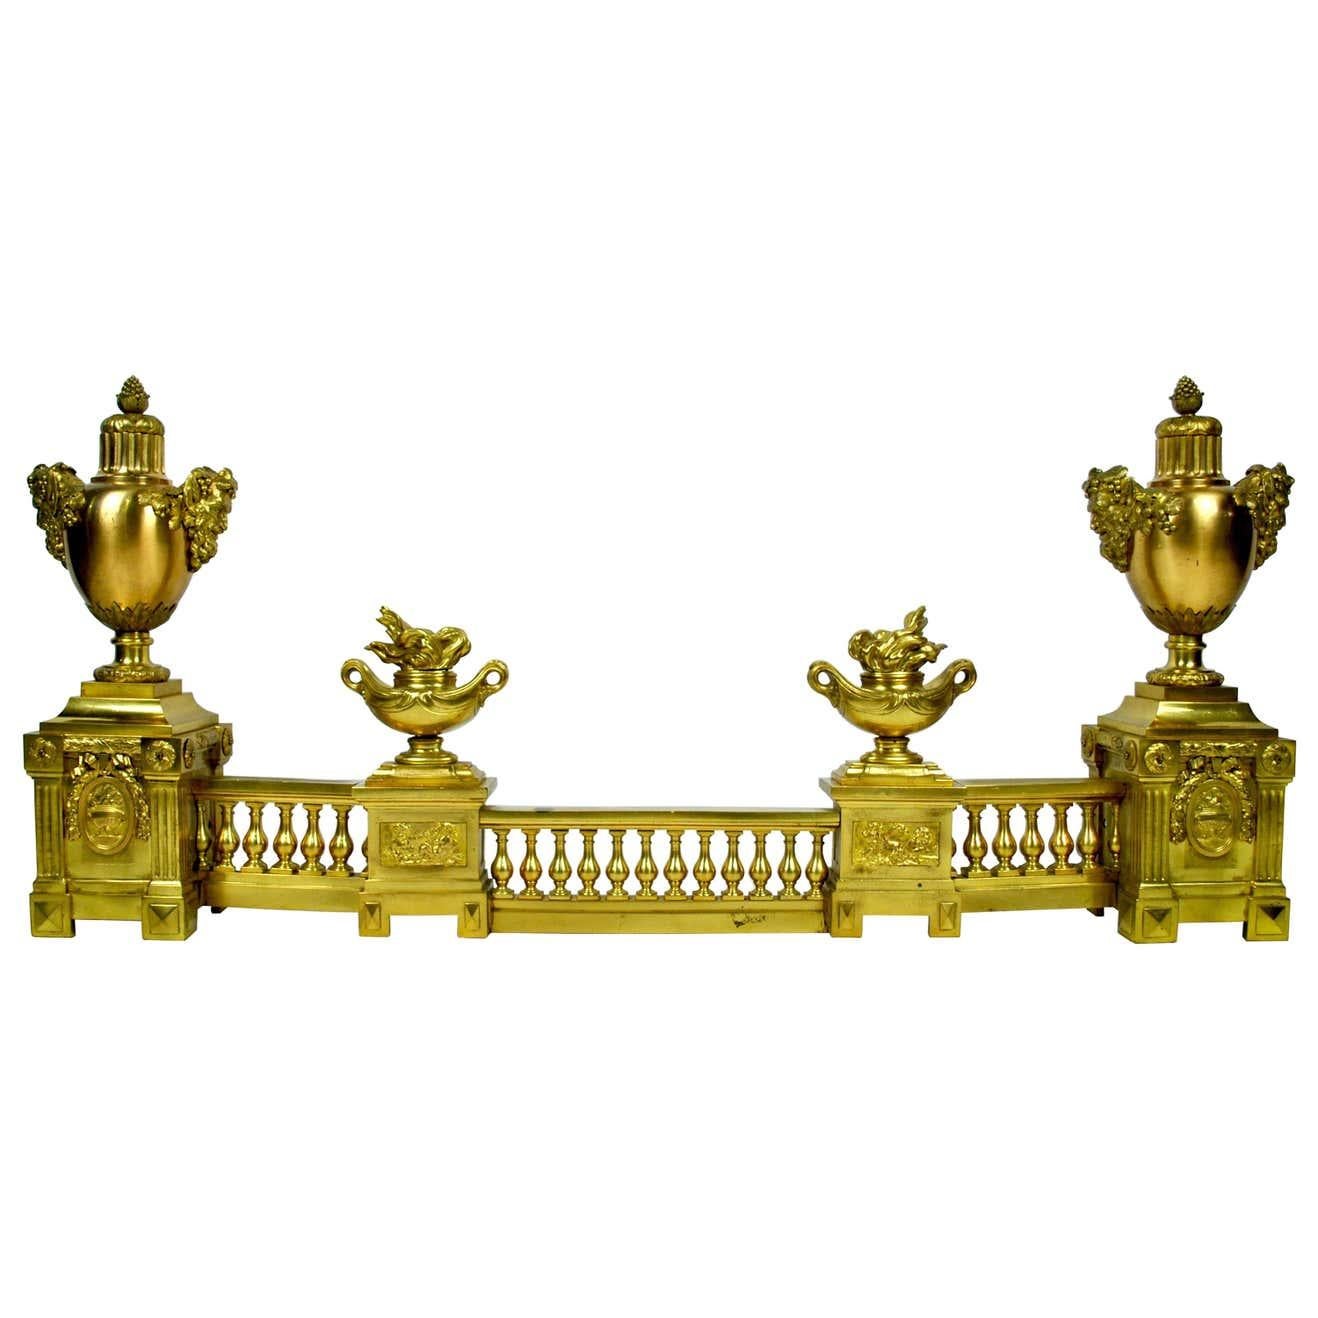 A large elaborate French ormolu on brass fire fender with fire urns in the centre moving to the heads of Bacchus on each side of the outer urns set upon pillars plinths attached to the classic gallery frees and balustrade. Resets attached to each